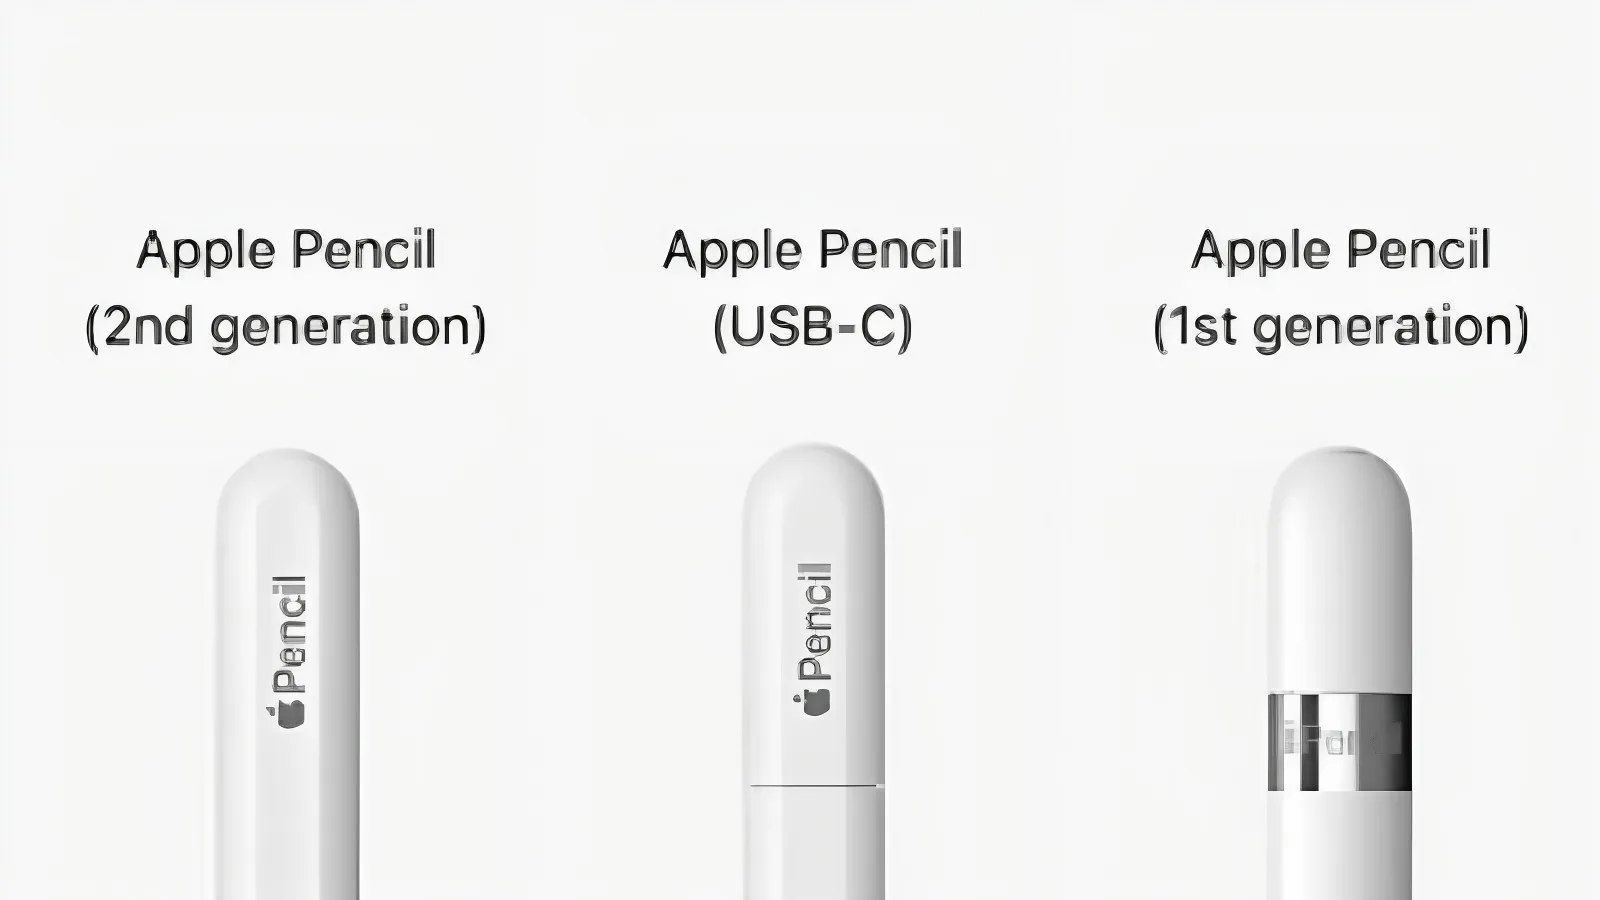 Stylus pen for ipad • Compare & find best price now »